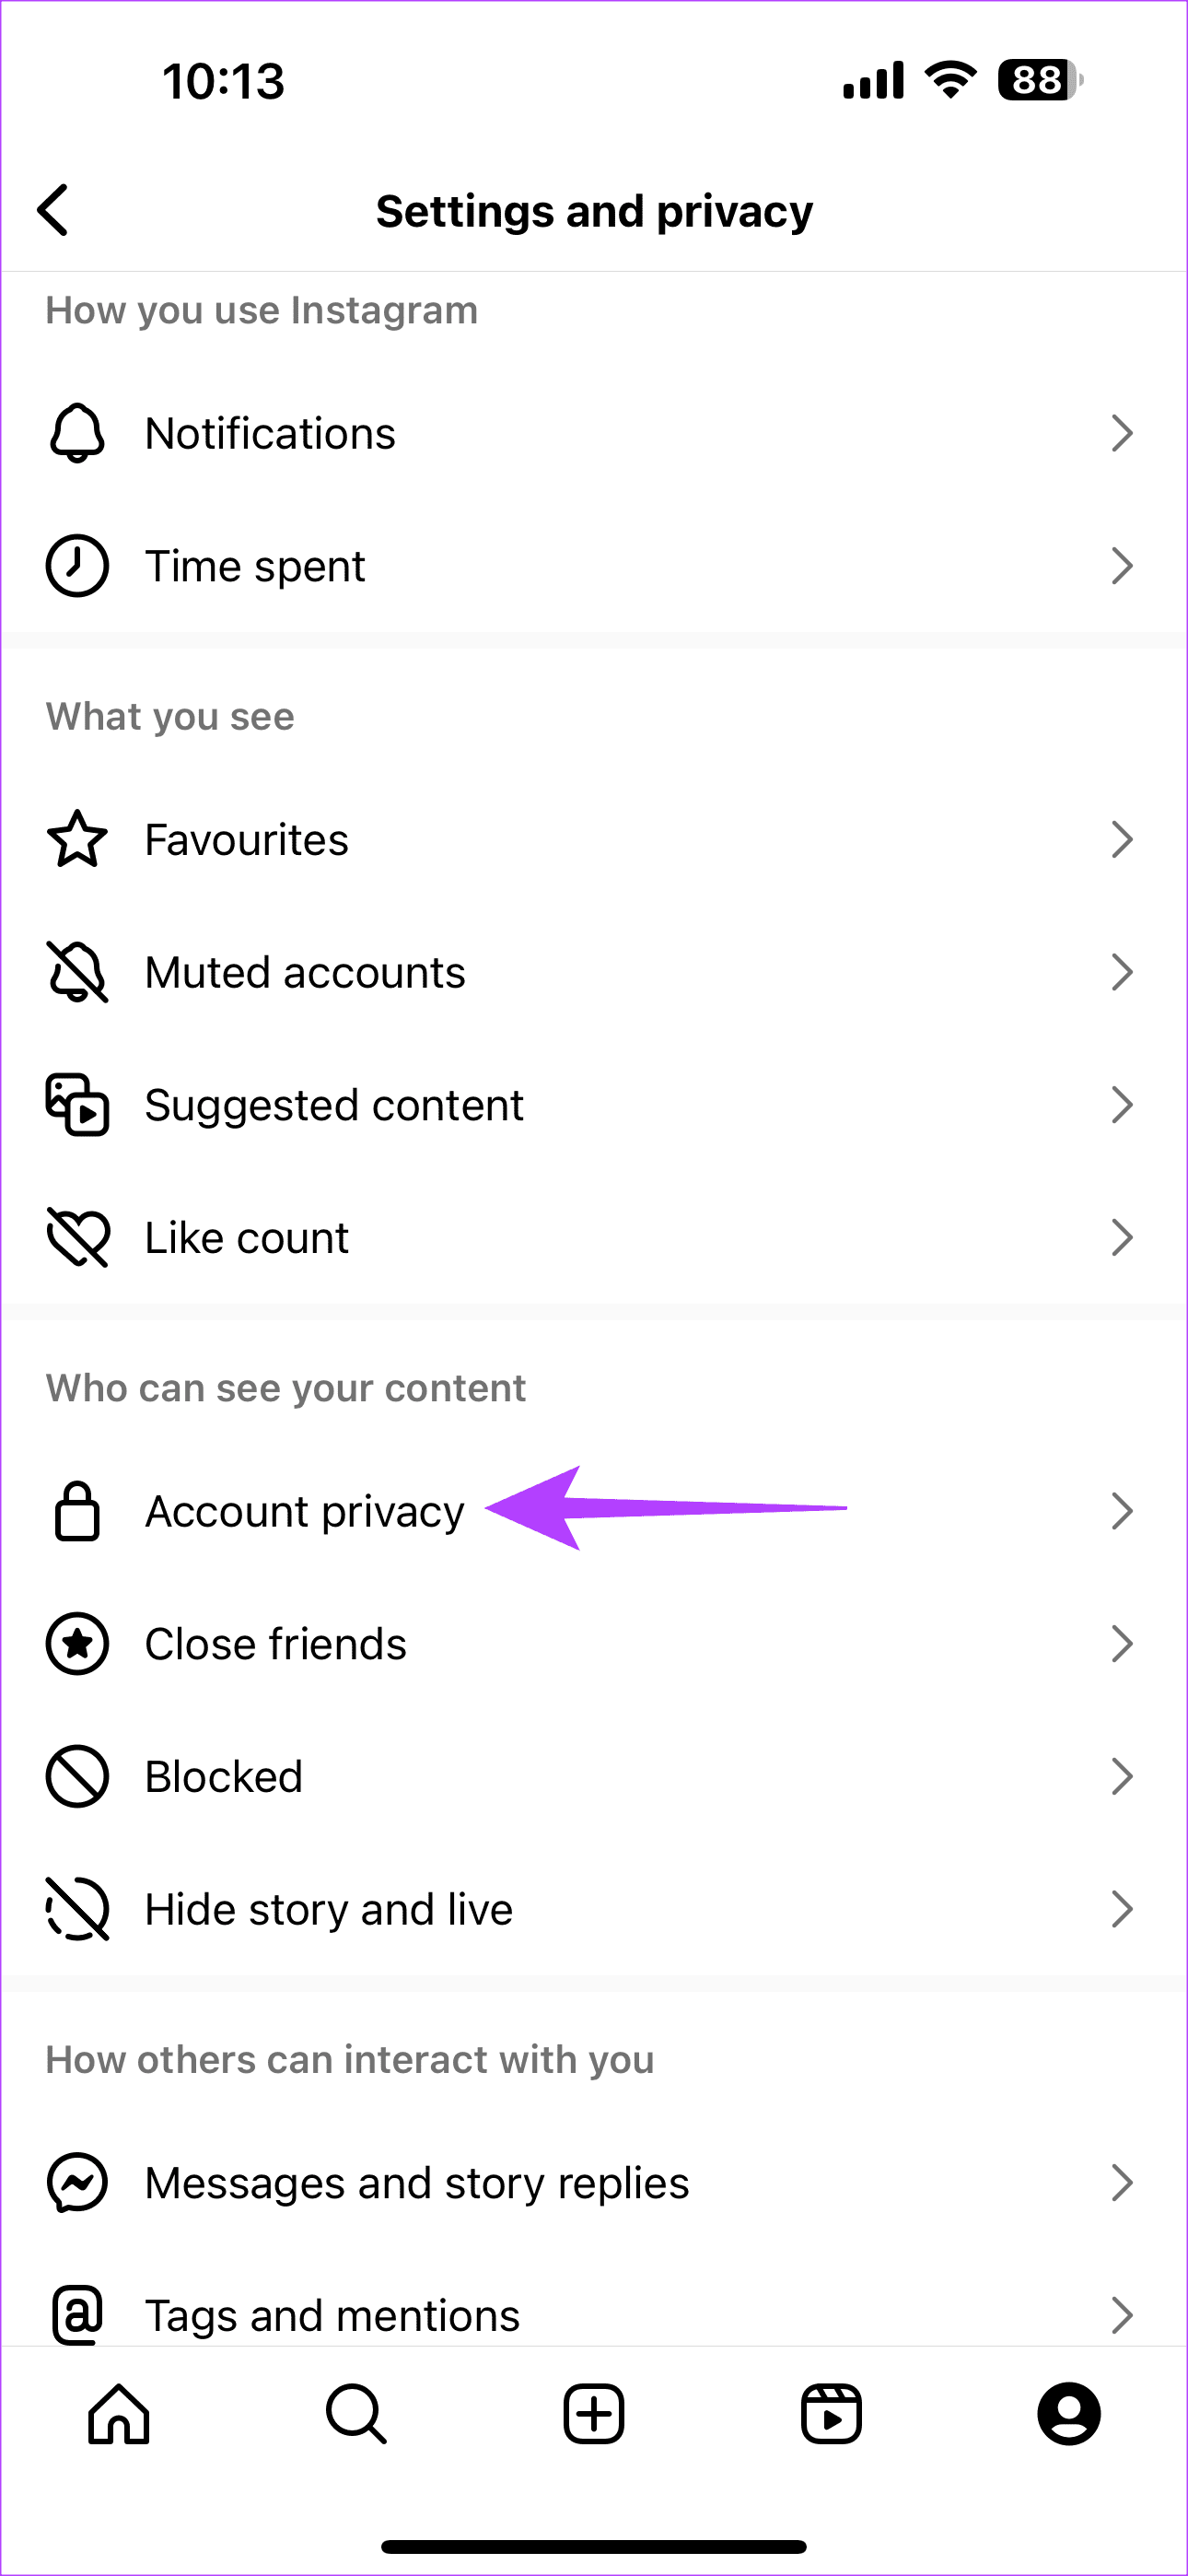 Tap Account privacy